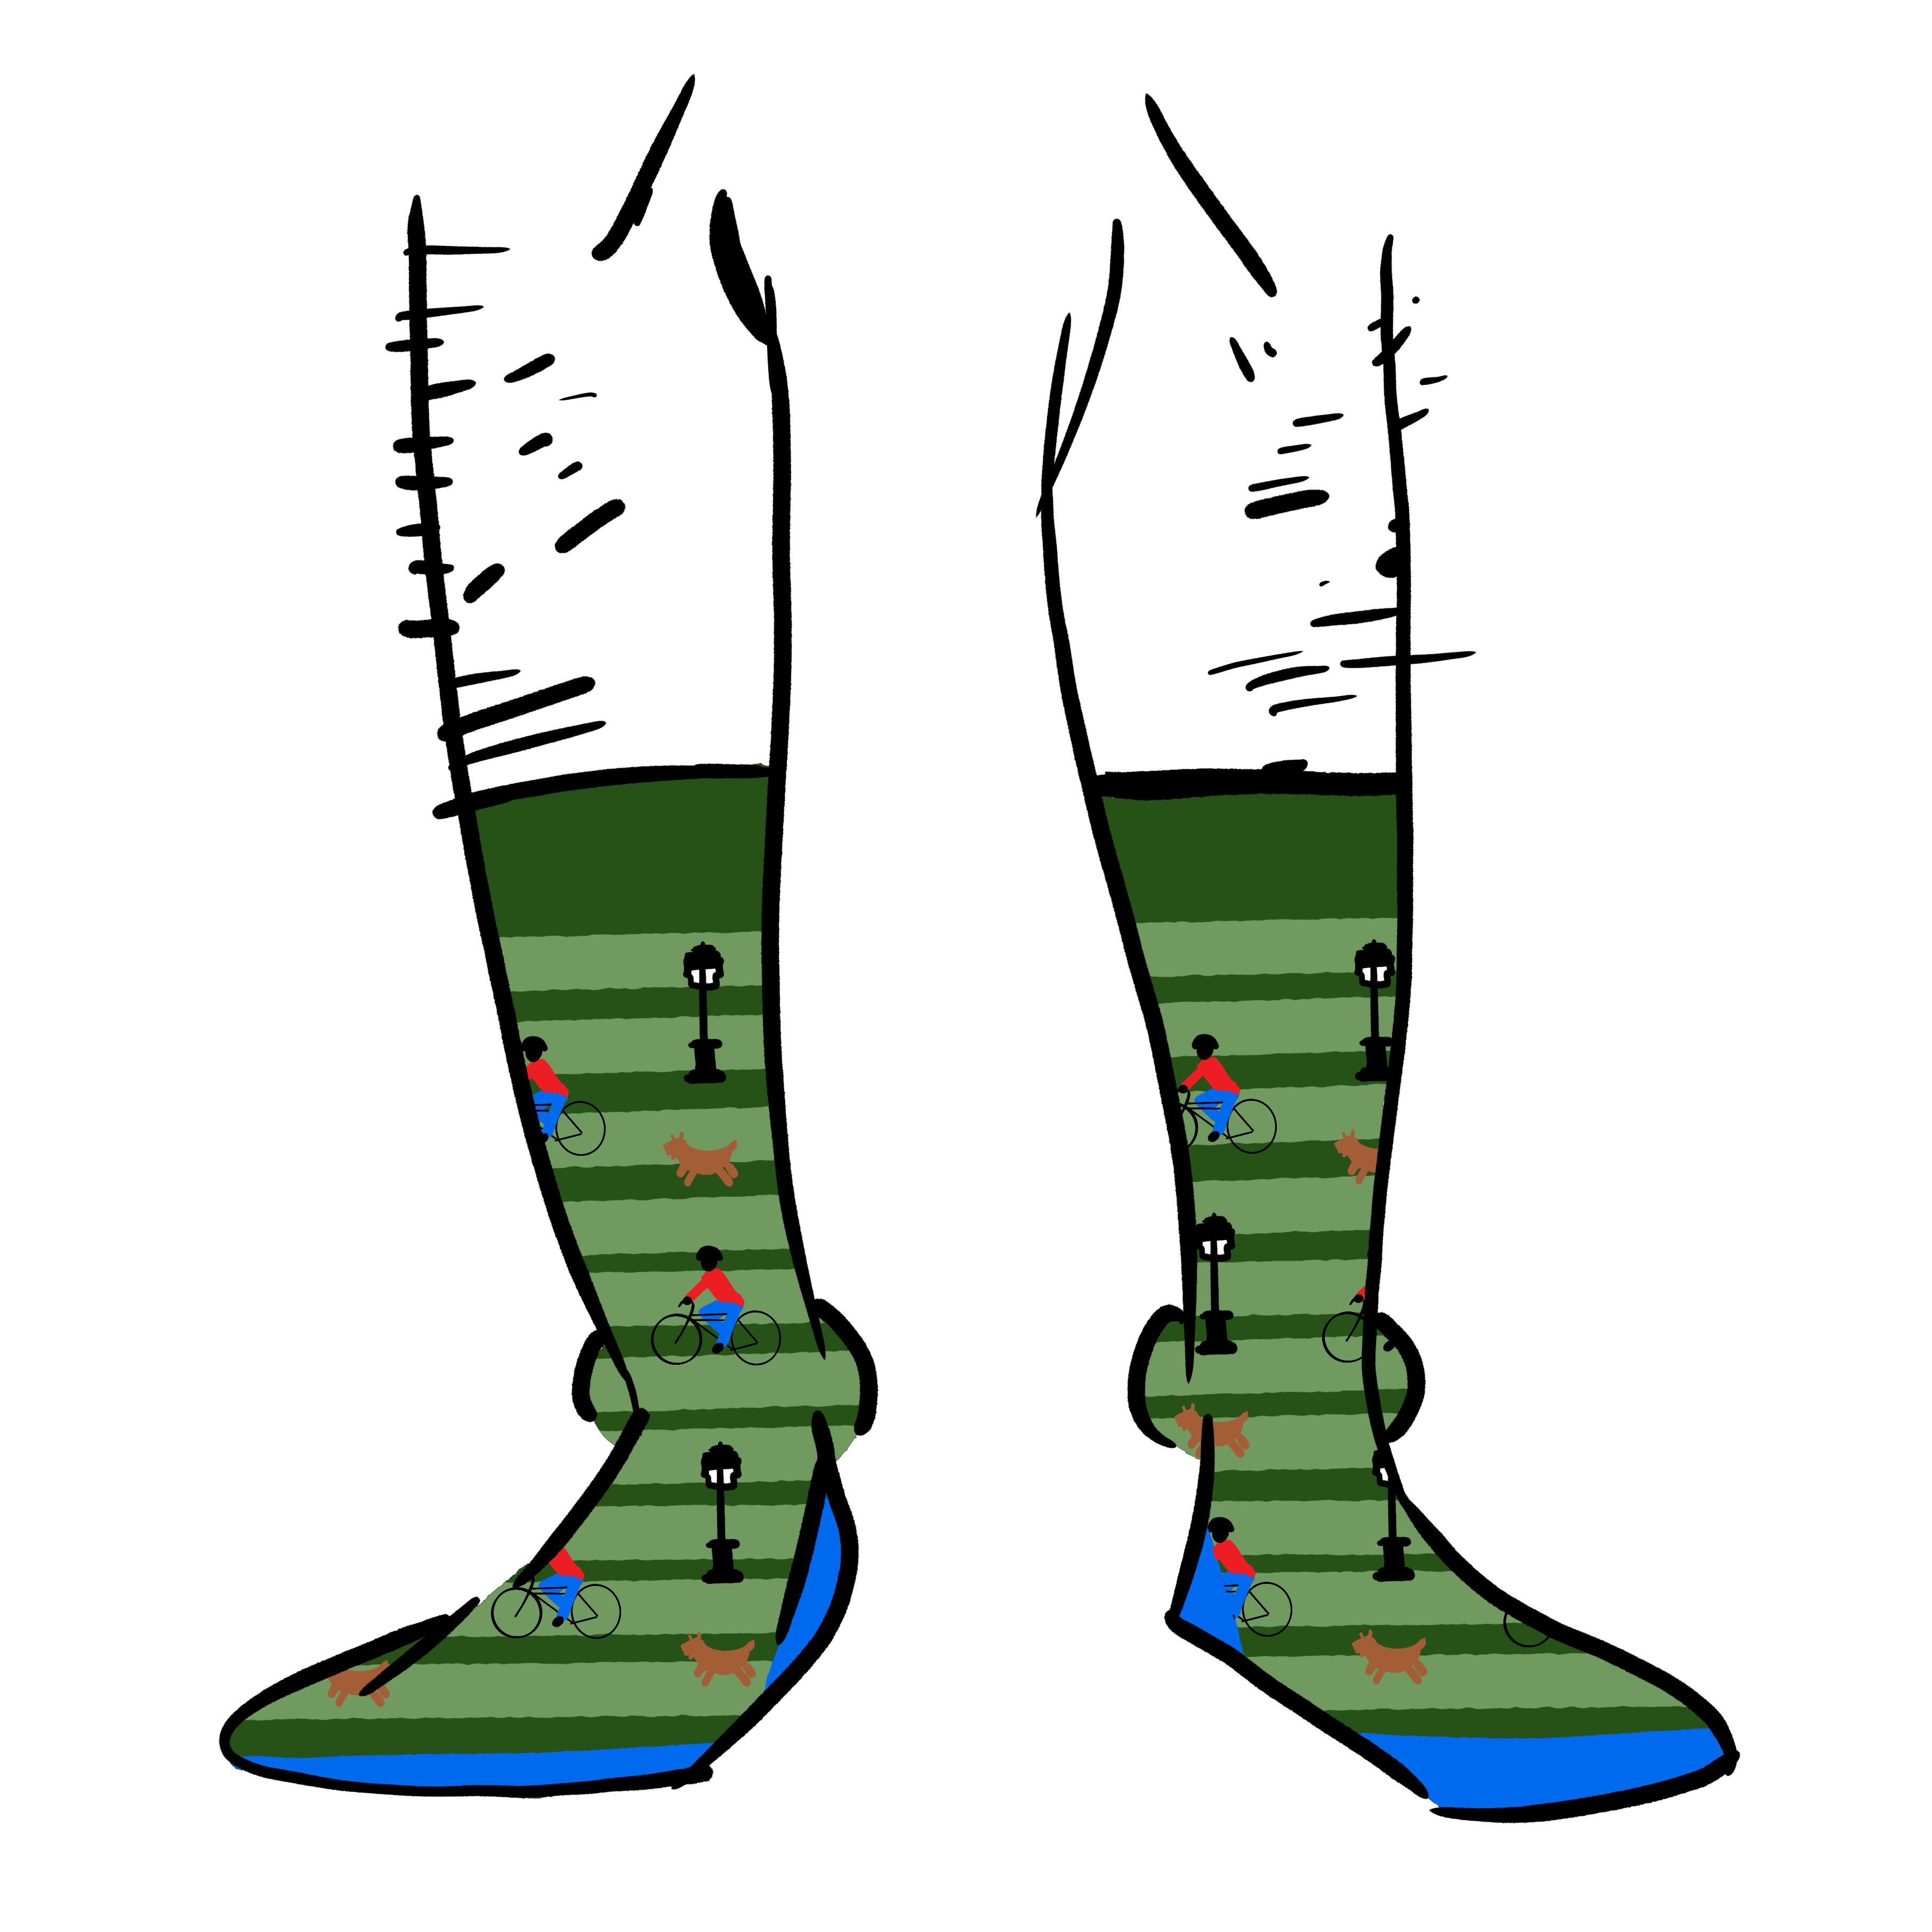 Dark green and light green striped socks. They have blue toes and heels. A lampost, a bike rider, and a dog are printed on them in a pattern.